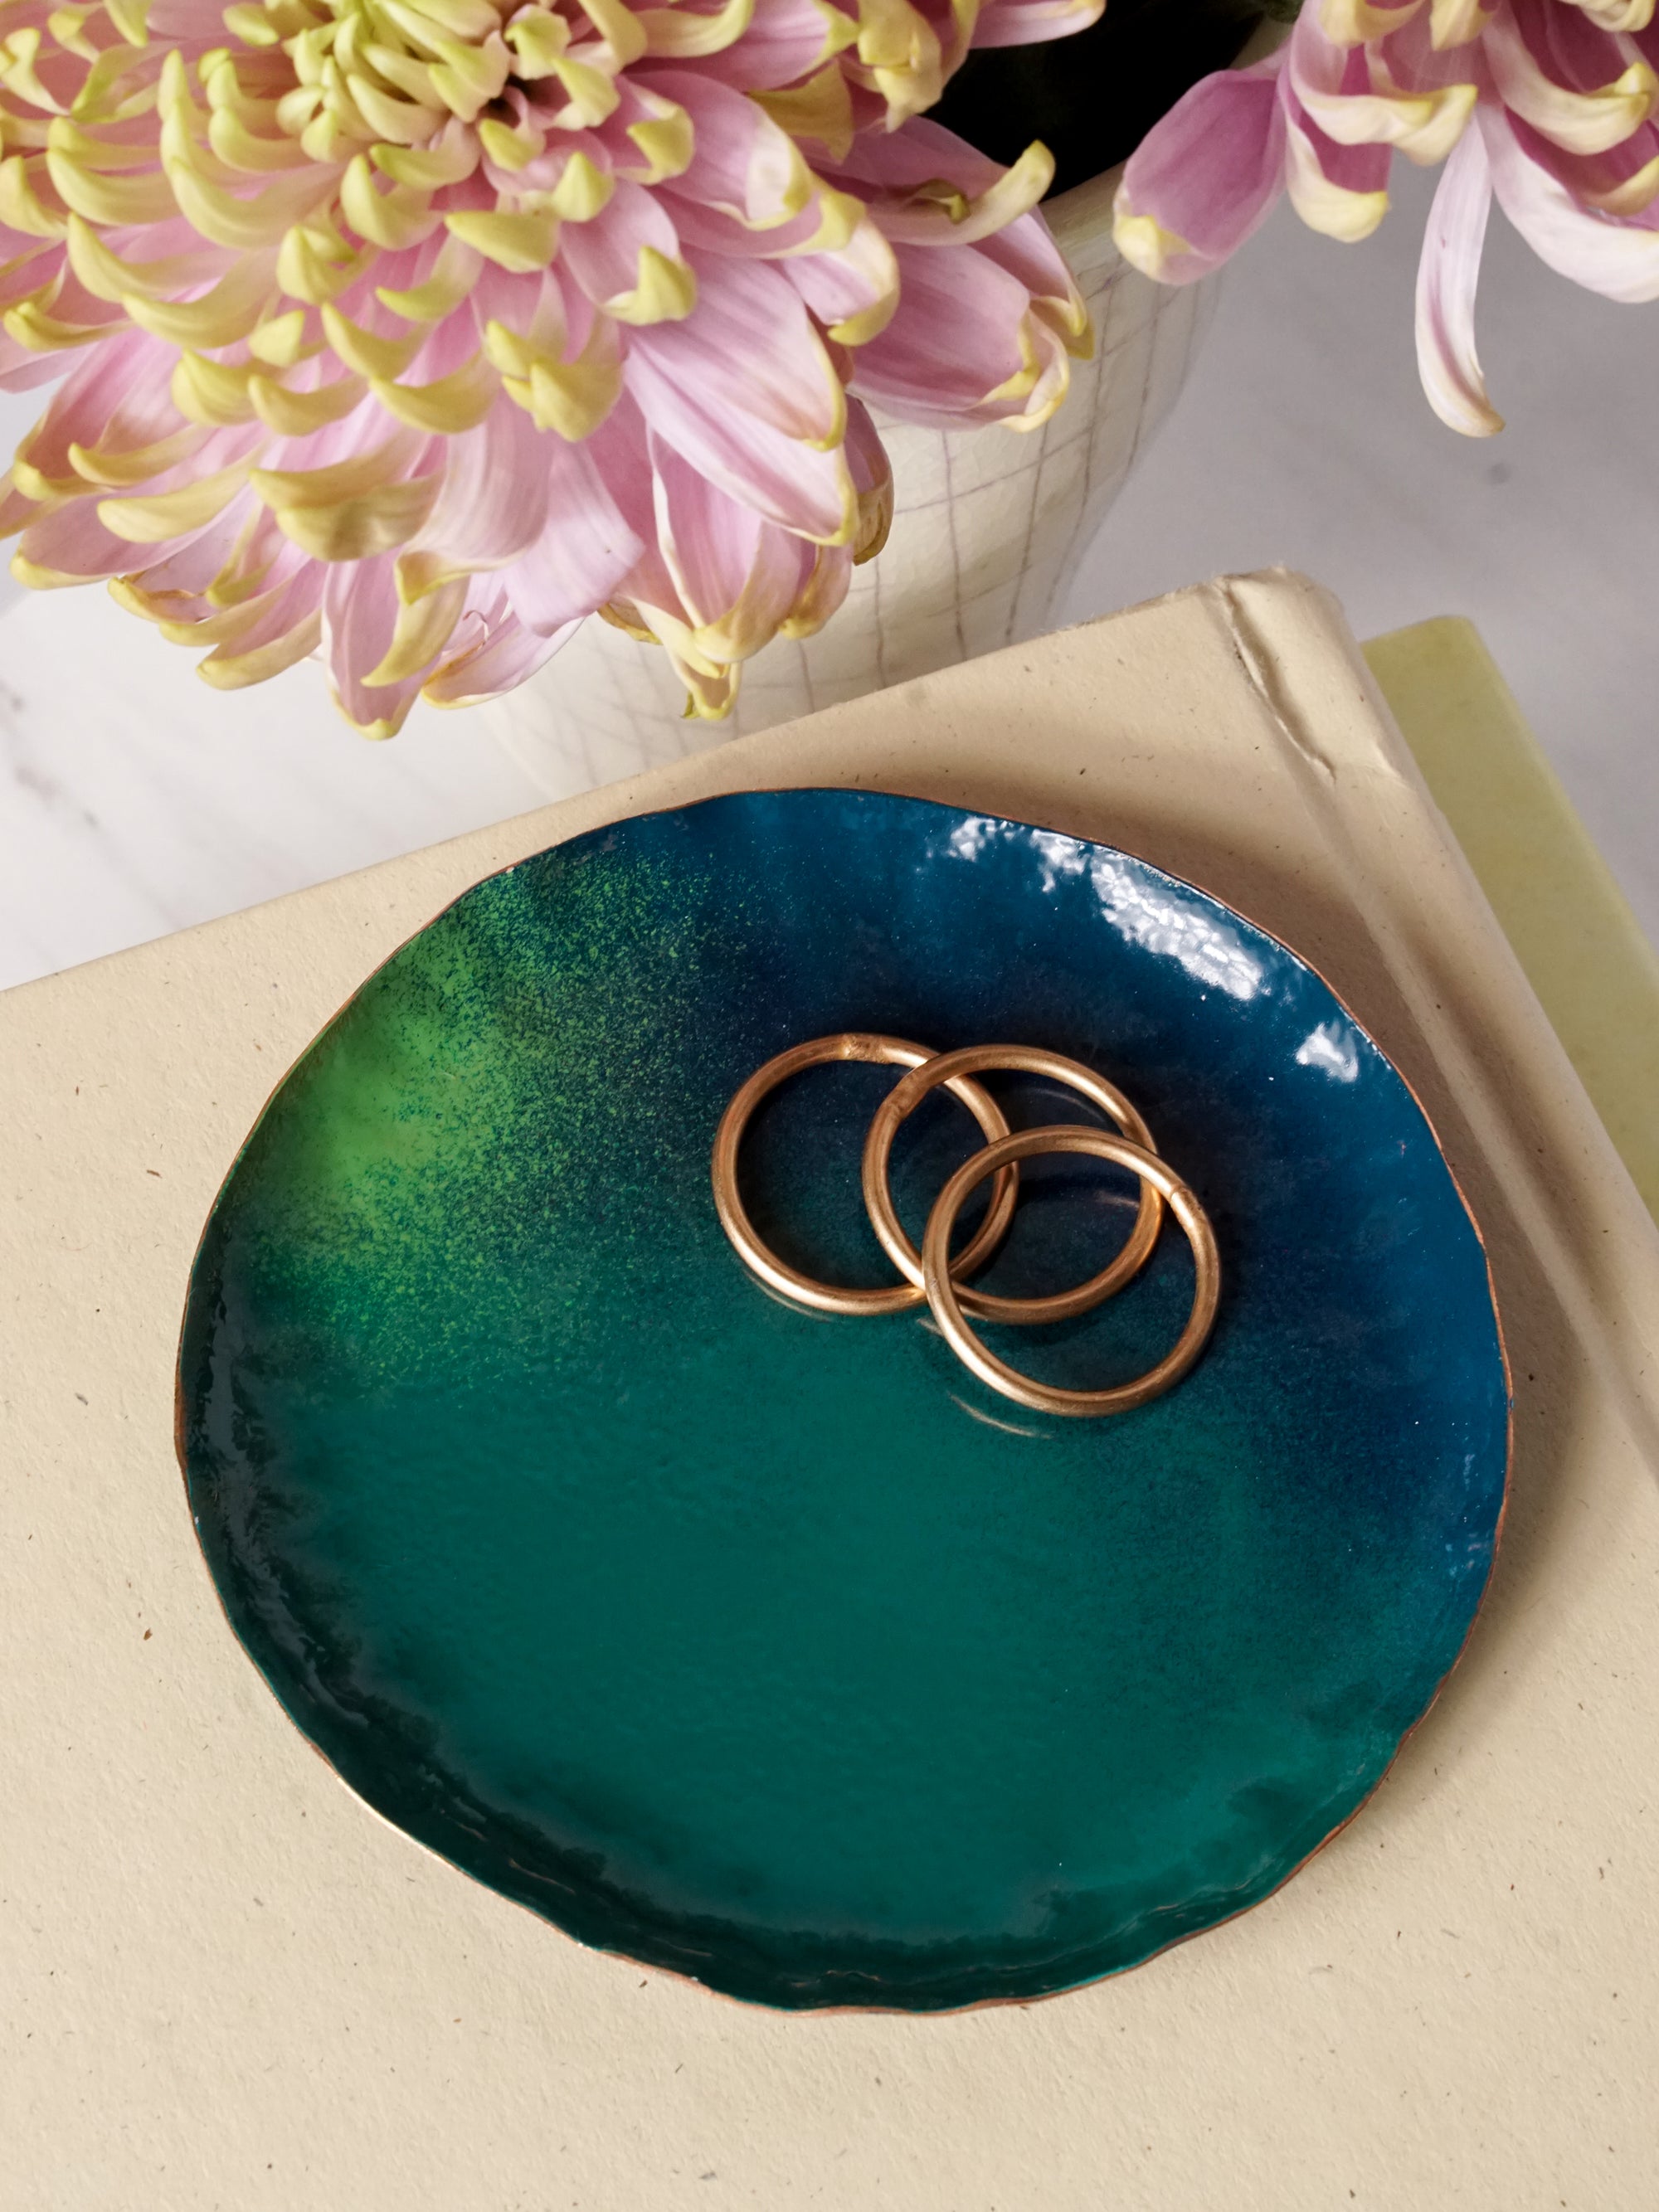 Chroma Colorful Little Round Metal Tray in Emerald Green, Fresh Green, and Deep Ocean